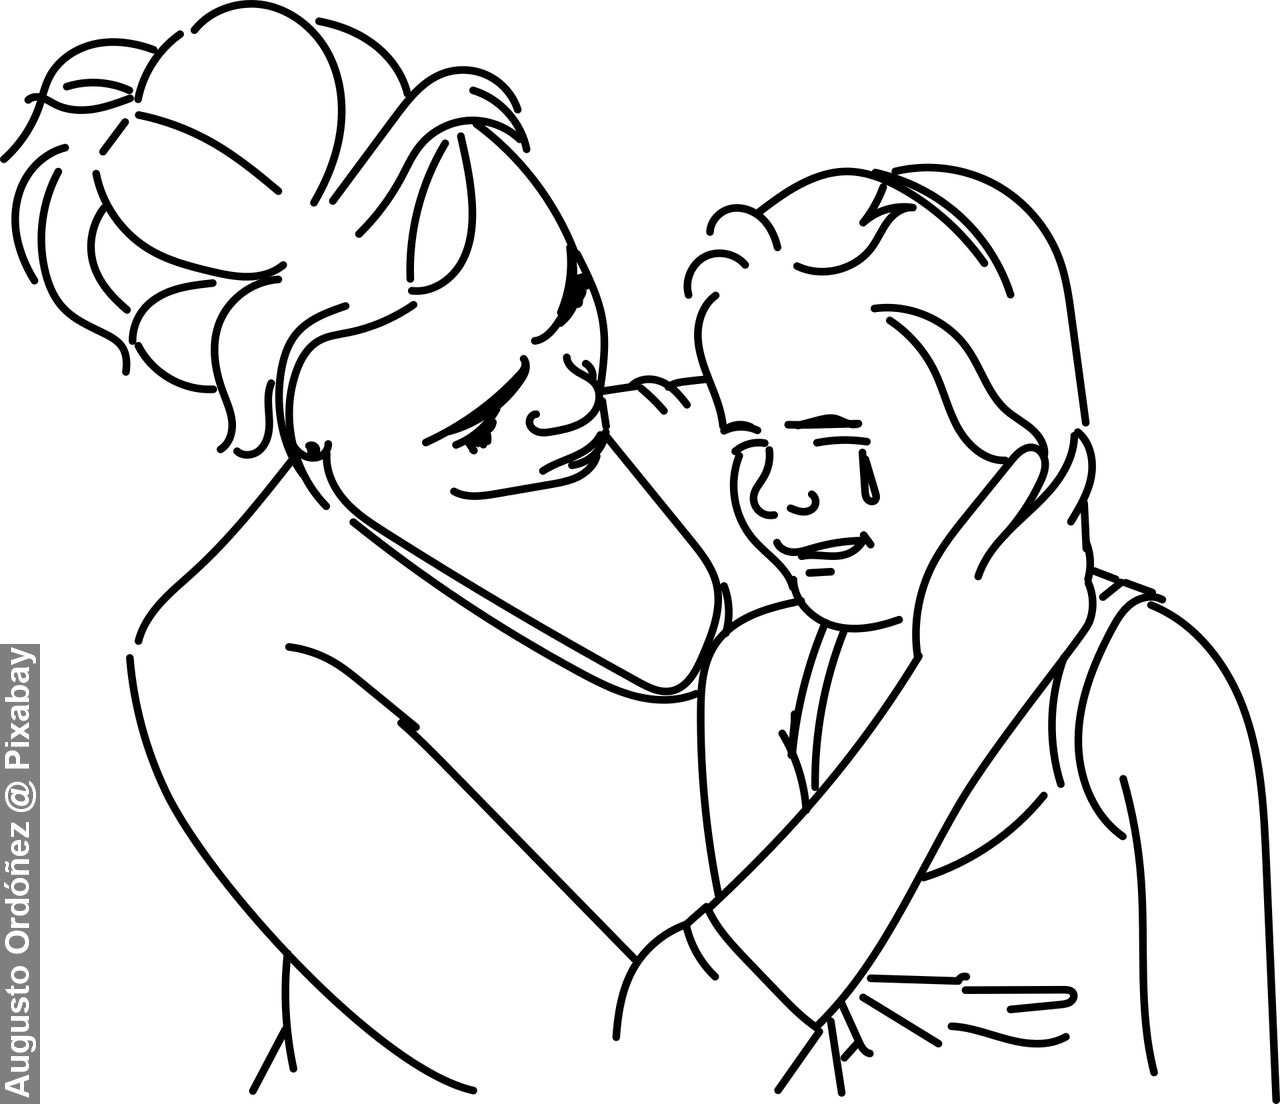 Line drawing of mother with crying sad daughter demonstrating a foster carer’s boundless heart